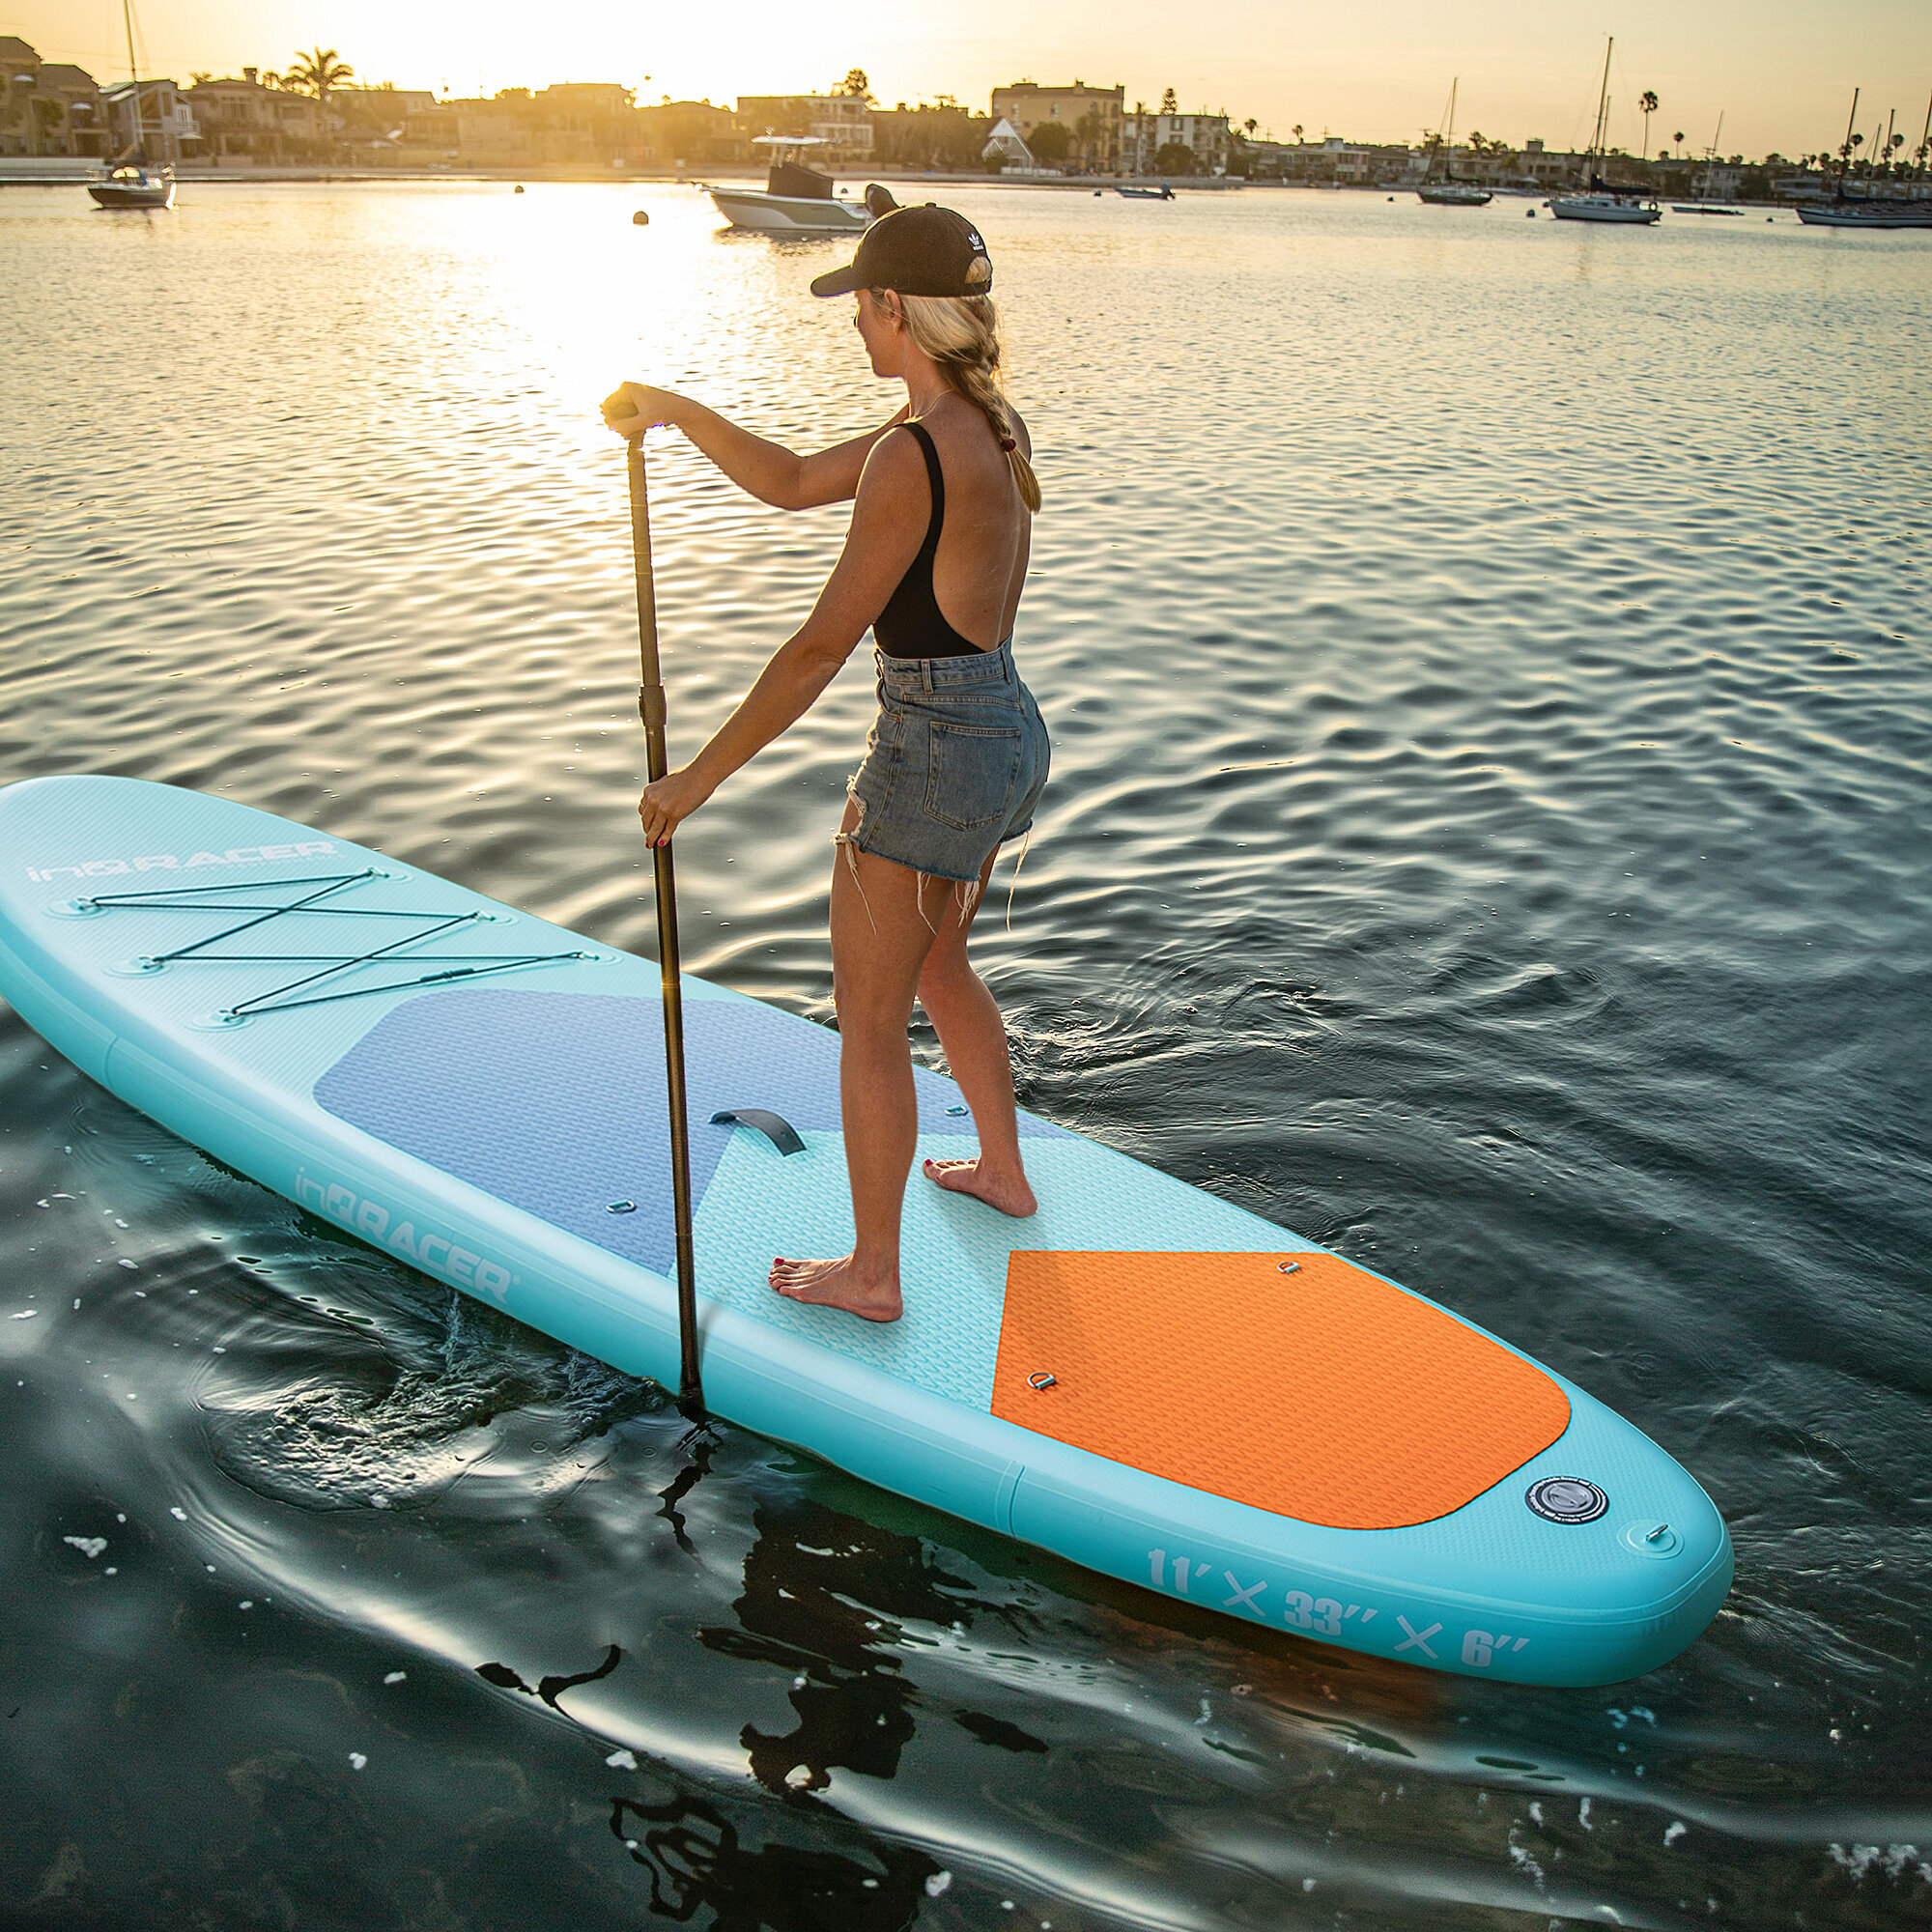 EDGEWOOD Inflatable Stand Up Paddle Board, 10'6/11'SUP Surfboard With  Premium SUP Accessories & Reviews